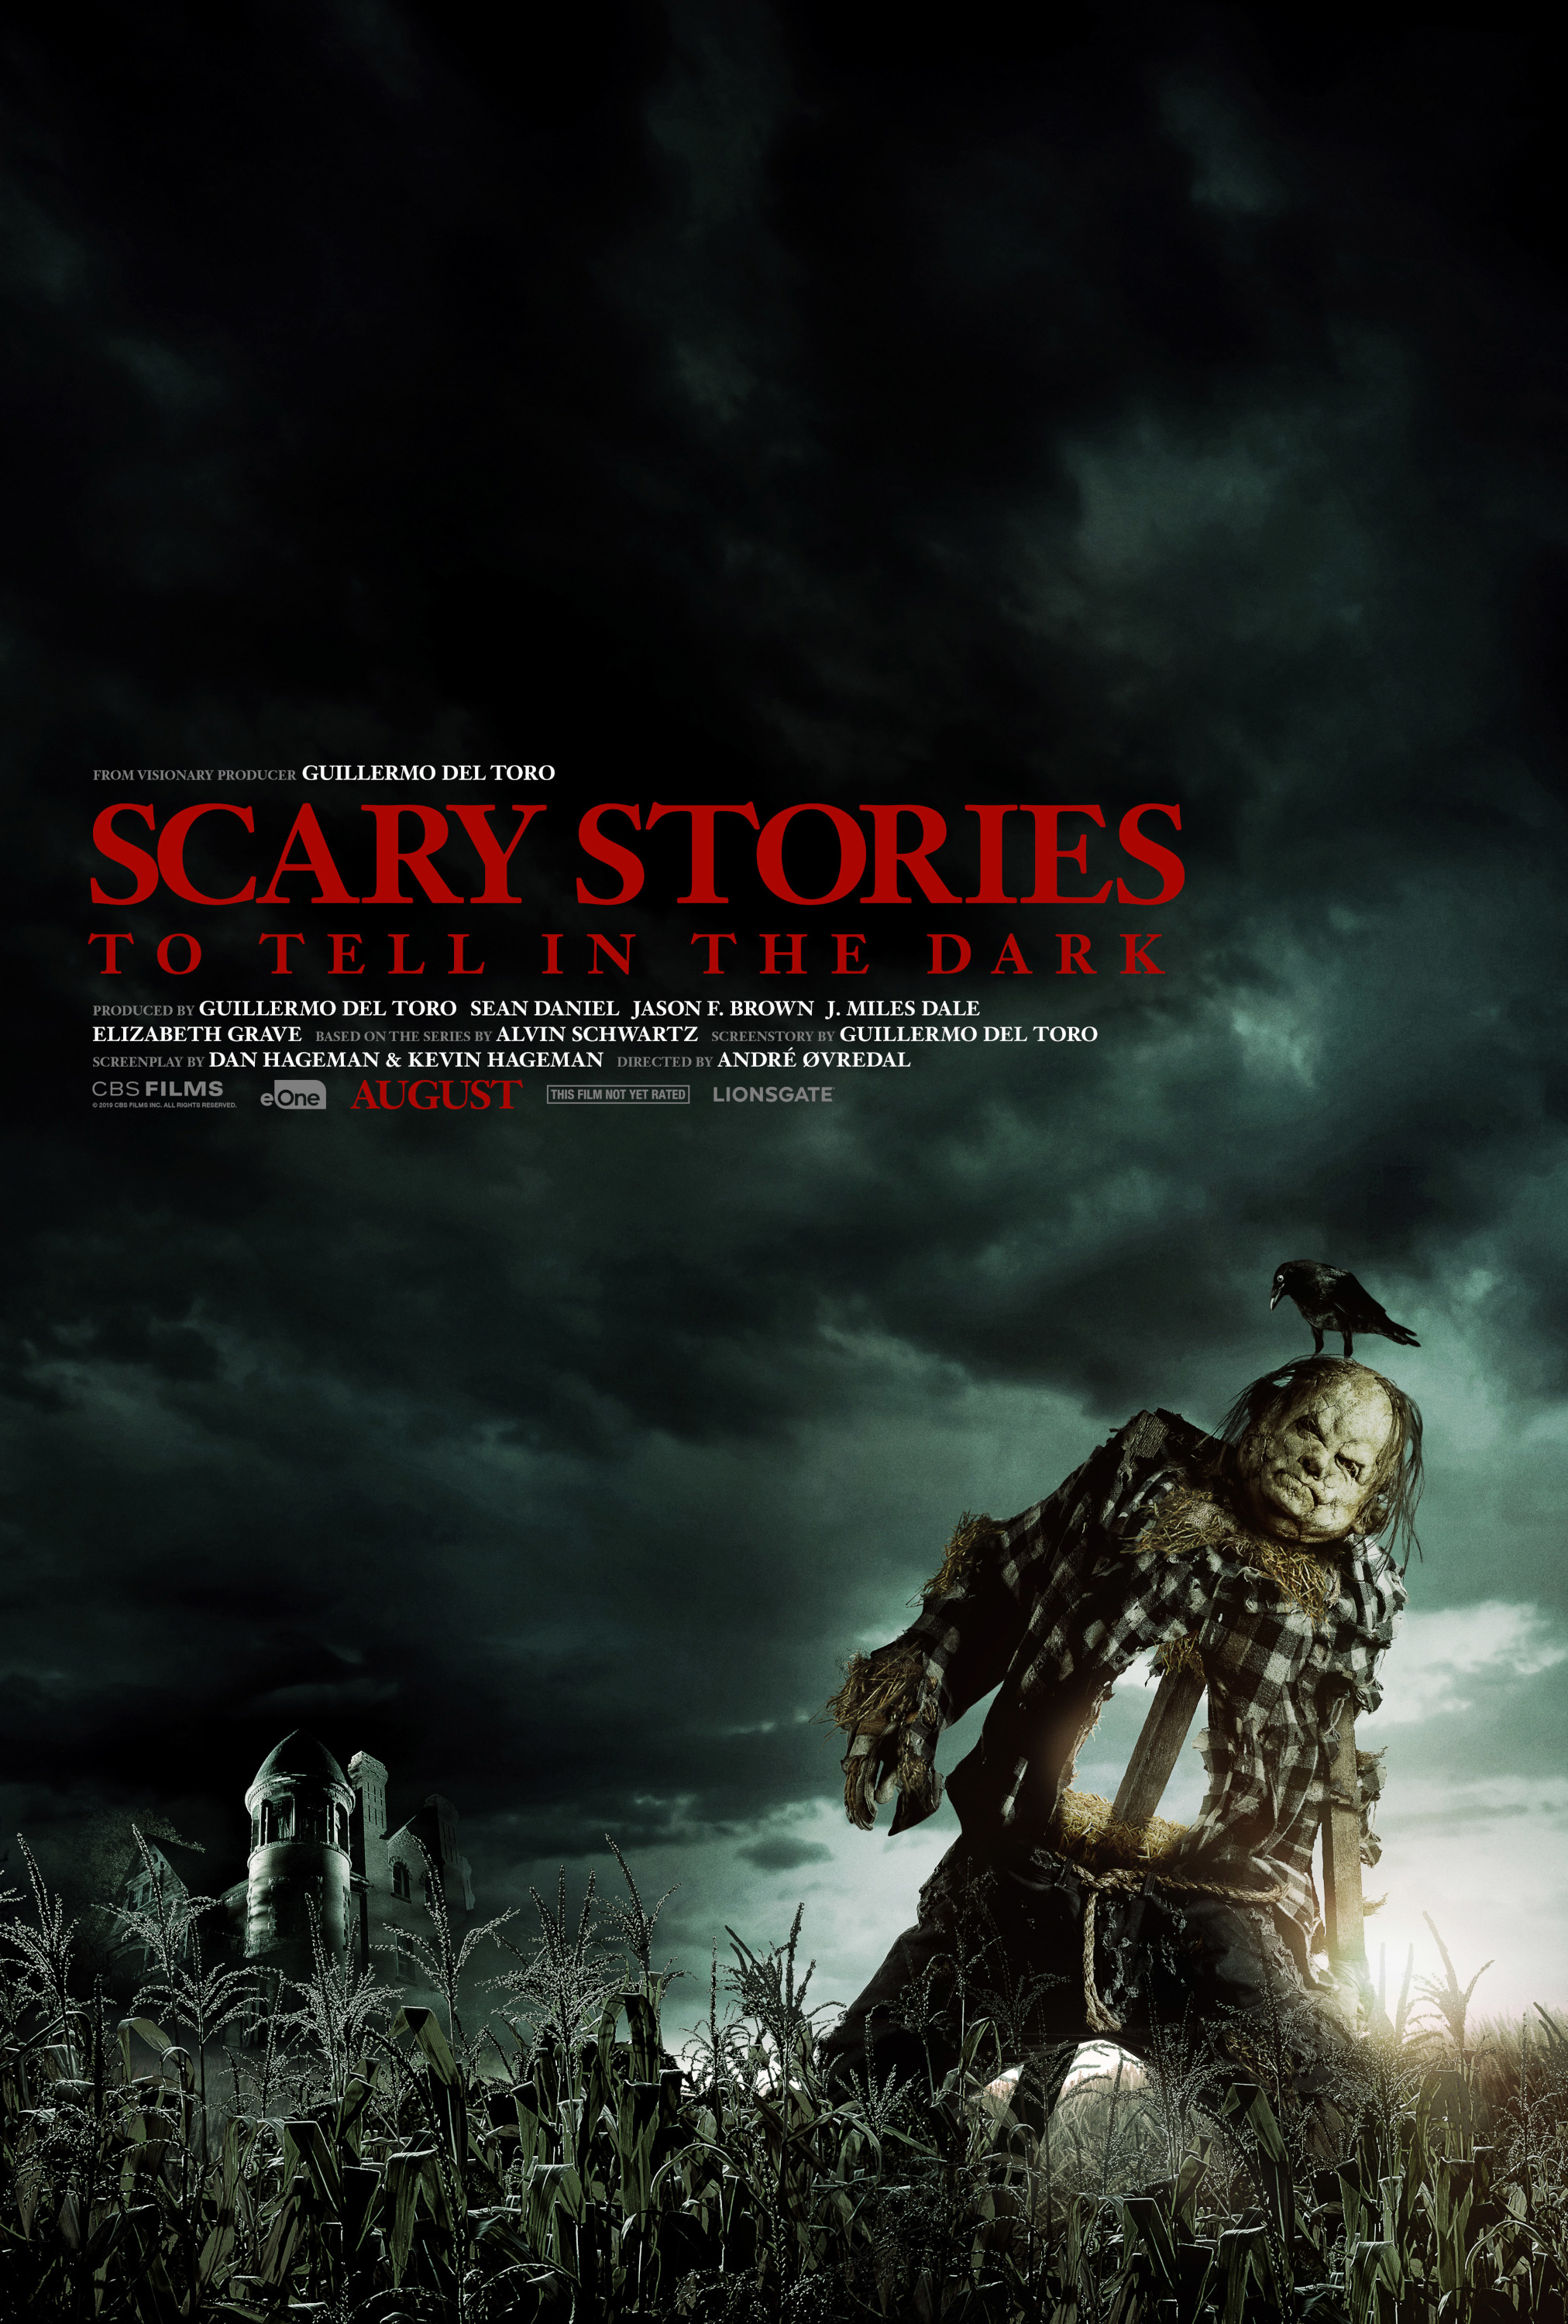 Scary Stories To Tell In The Dark film review: time to get spooky